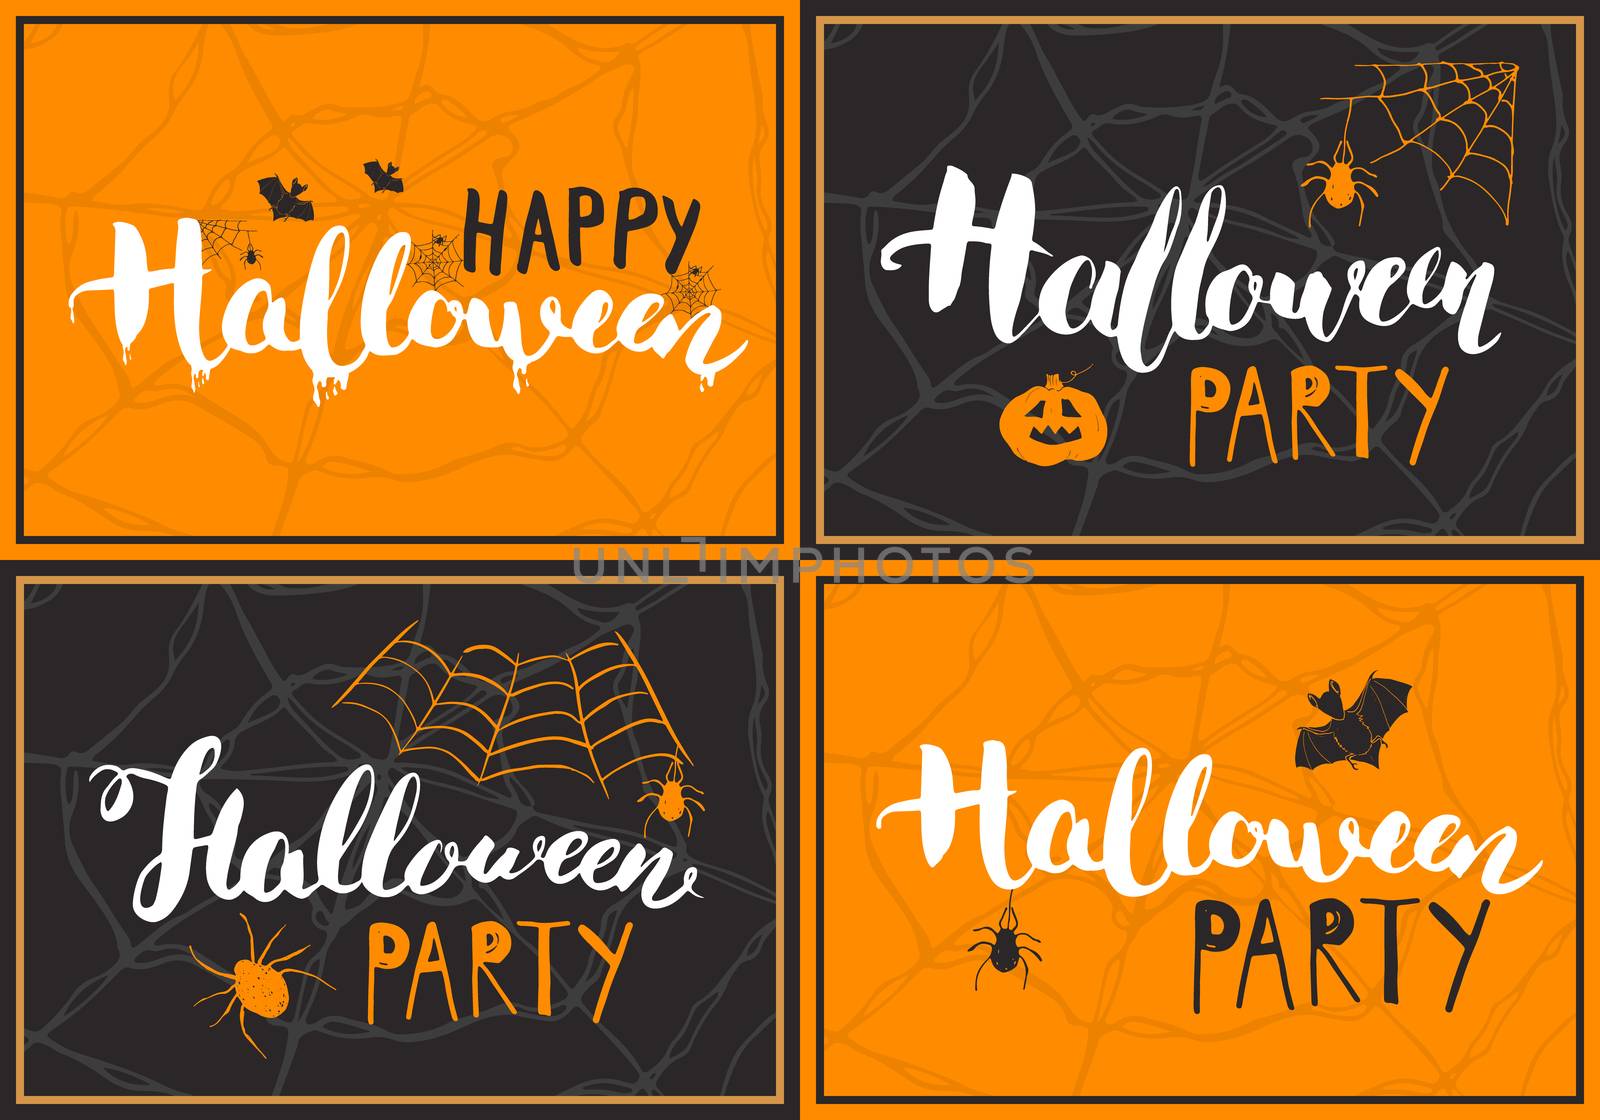 Halloween greeting cards set. Lettering calligraphy sign and hand drawn elements, party invitation or holiday banner design vector illustration.